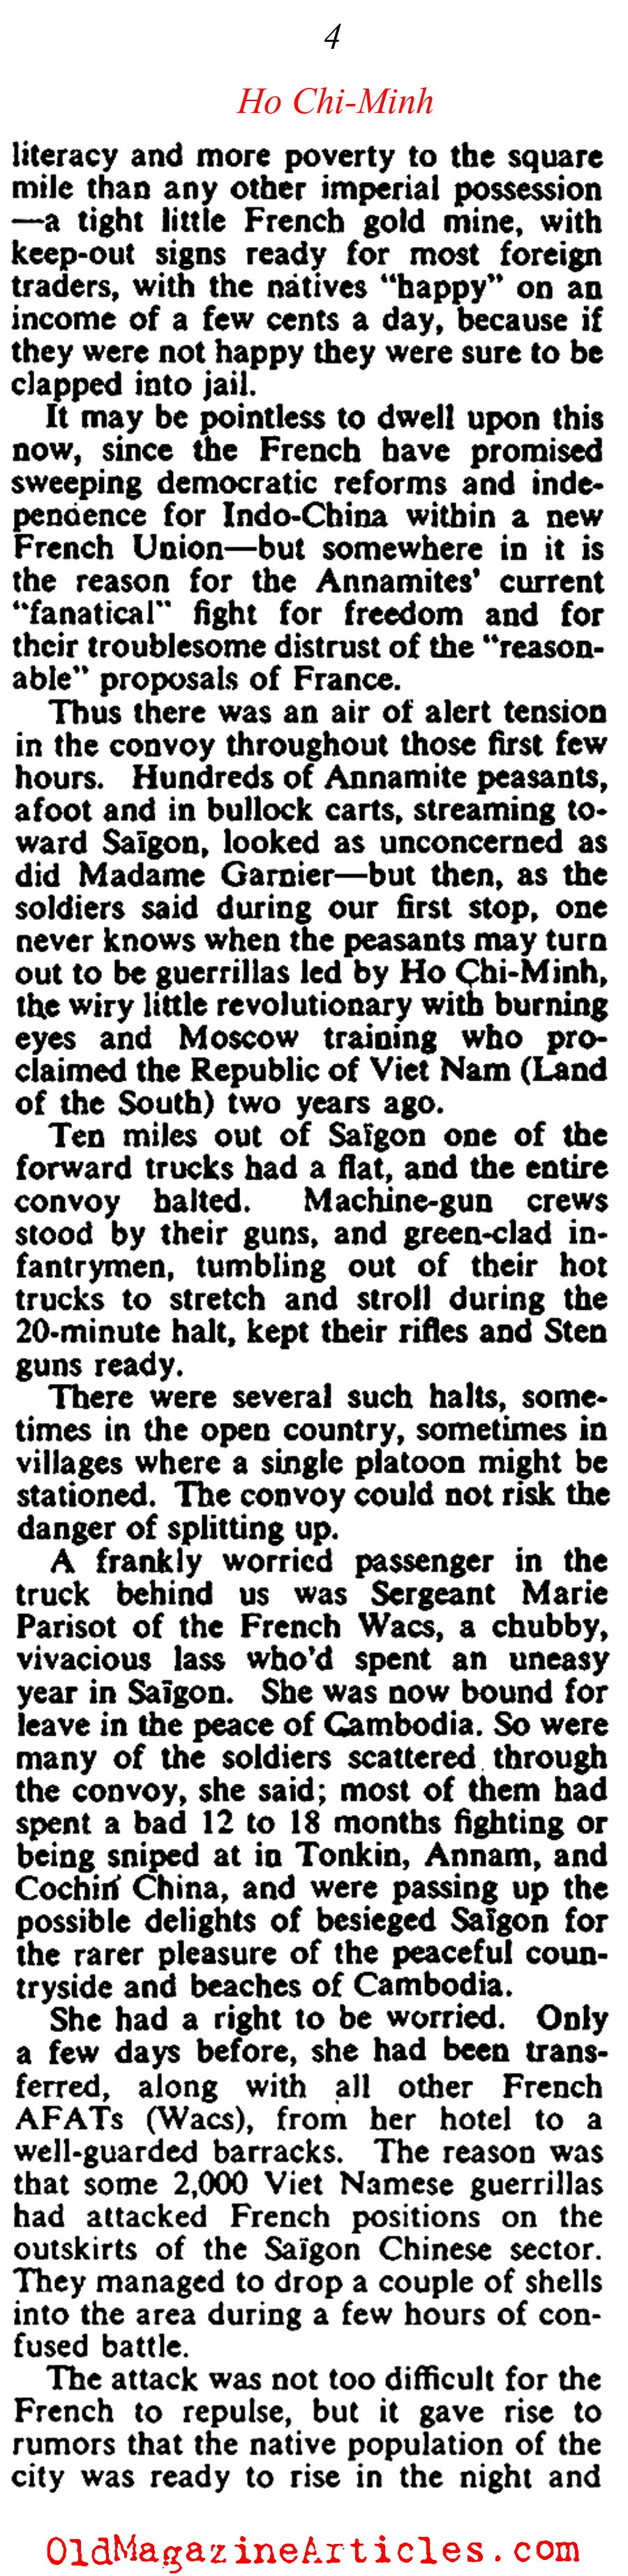 Ho Chi-Minh on the March... (Collier's Magazine, 1947)